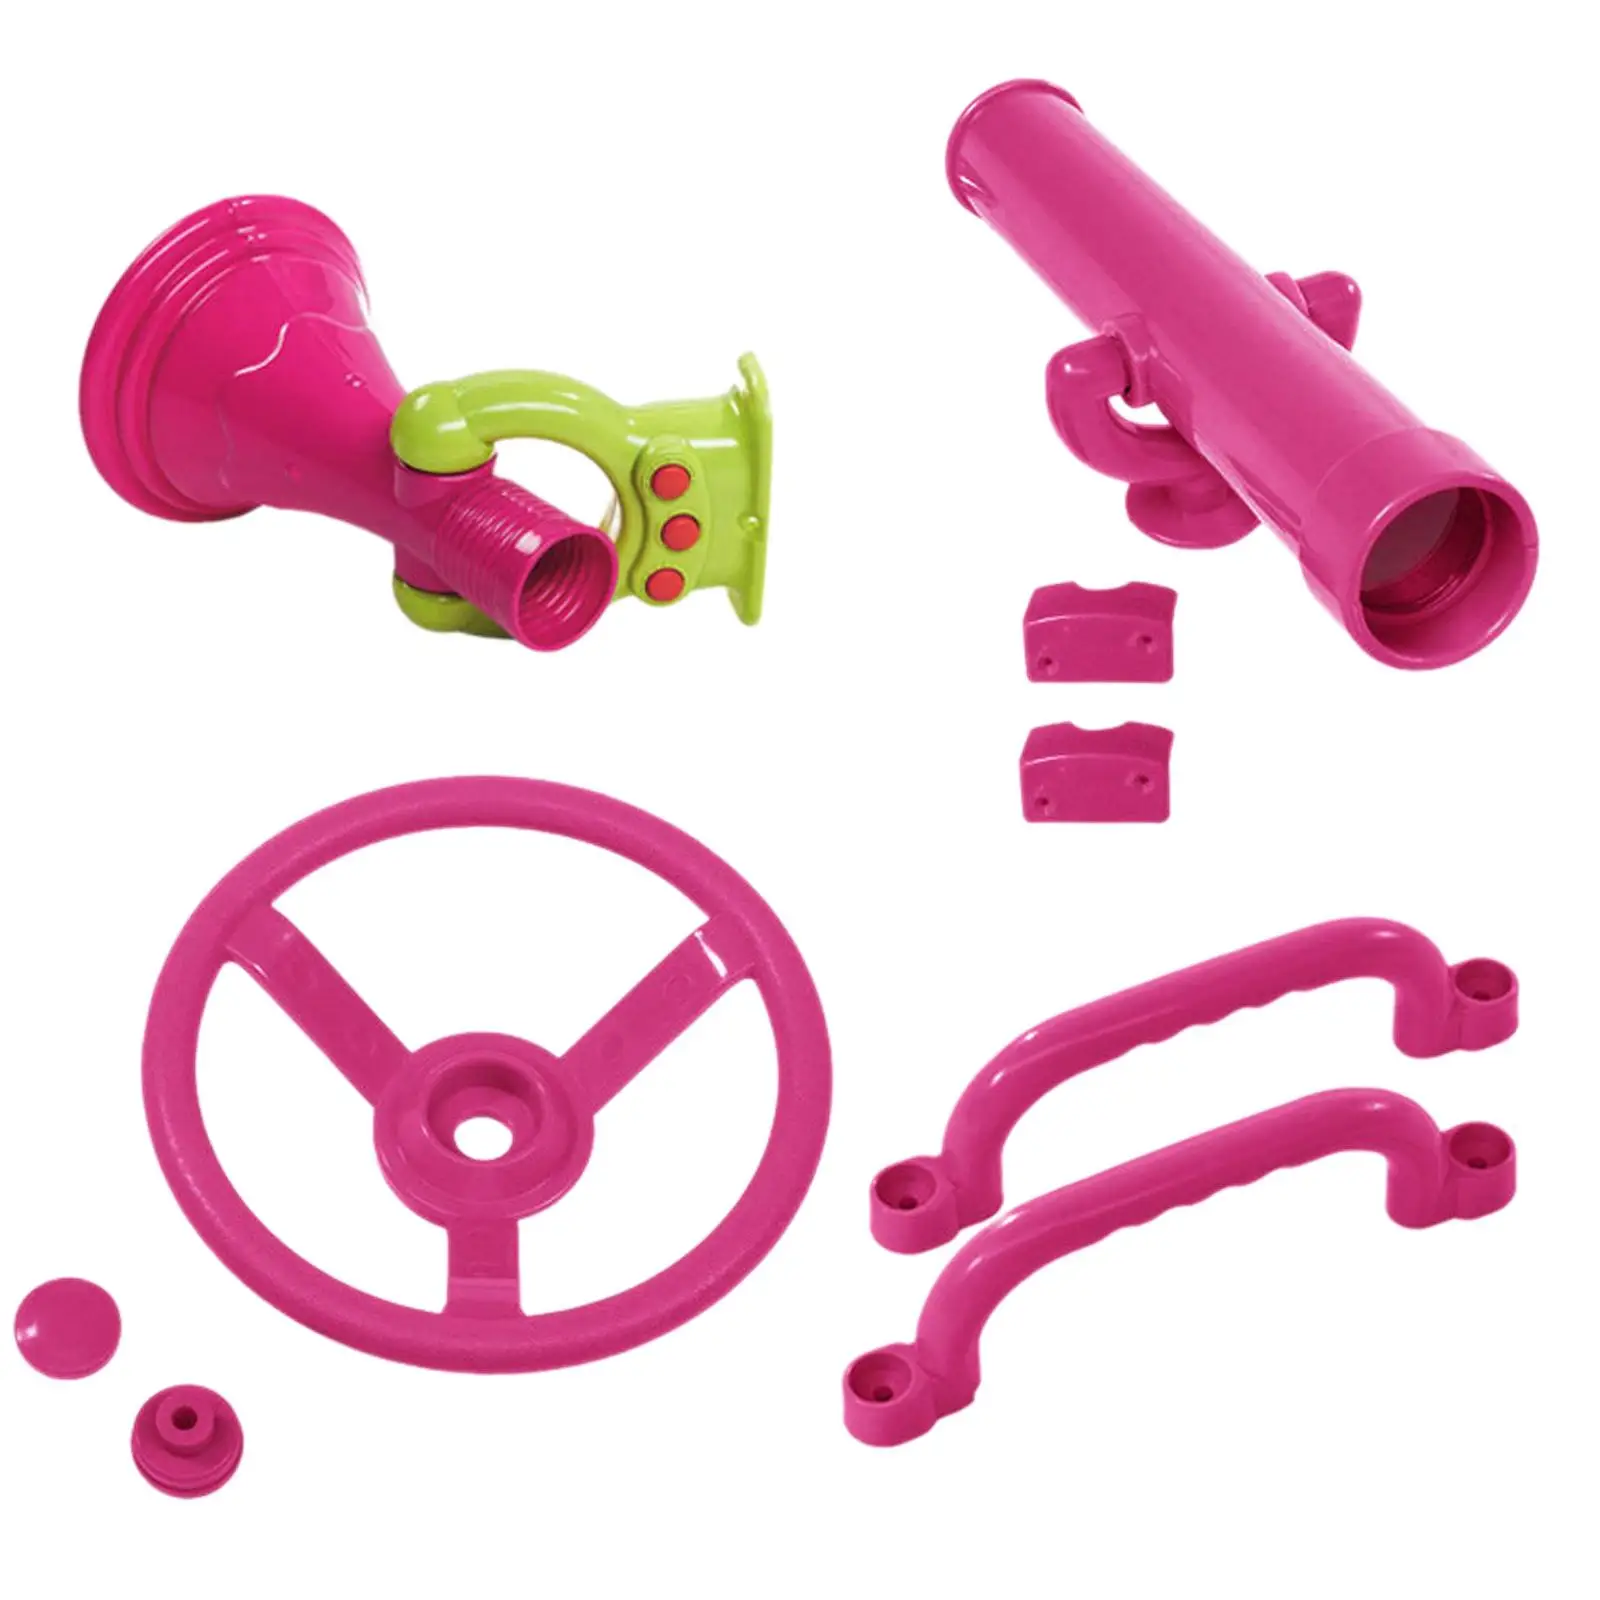 4Pcs Playground Accessories Pink Parts Pirate Ship Wheel for Kids for Outdoor Playhouse Backyard Treehouse Swingset Boys Girls